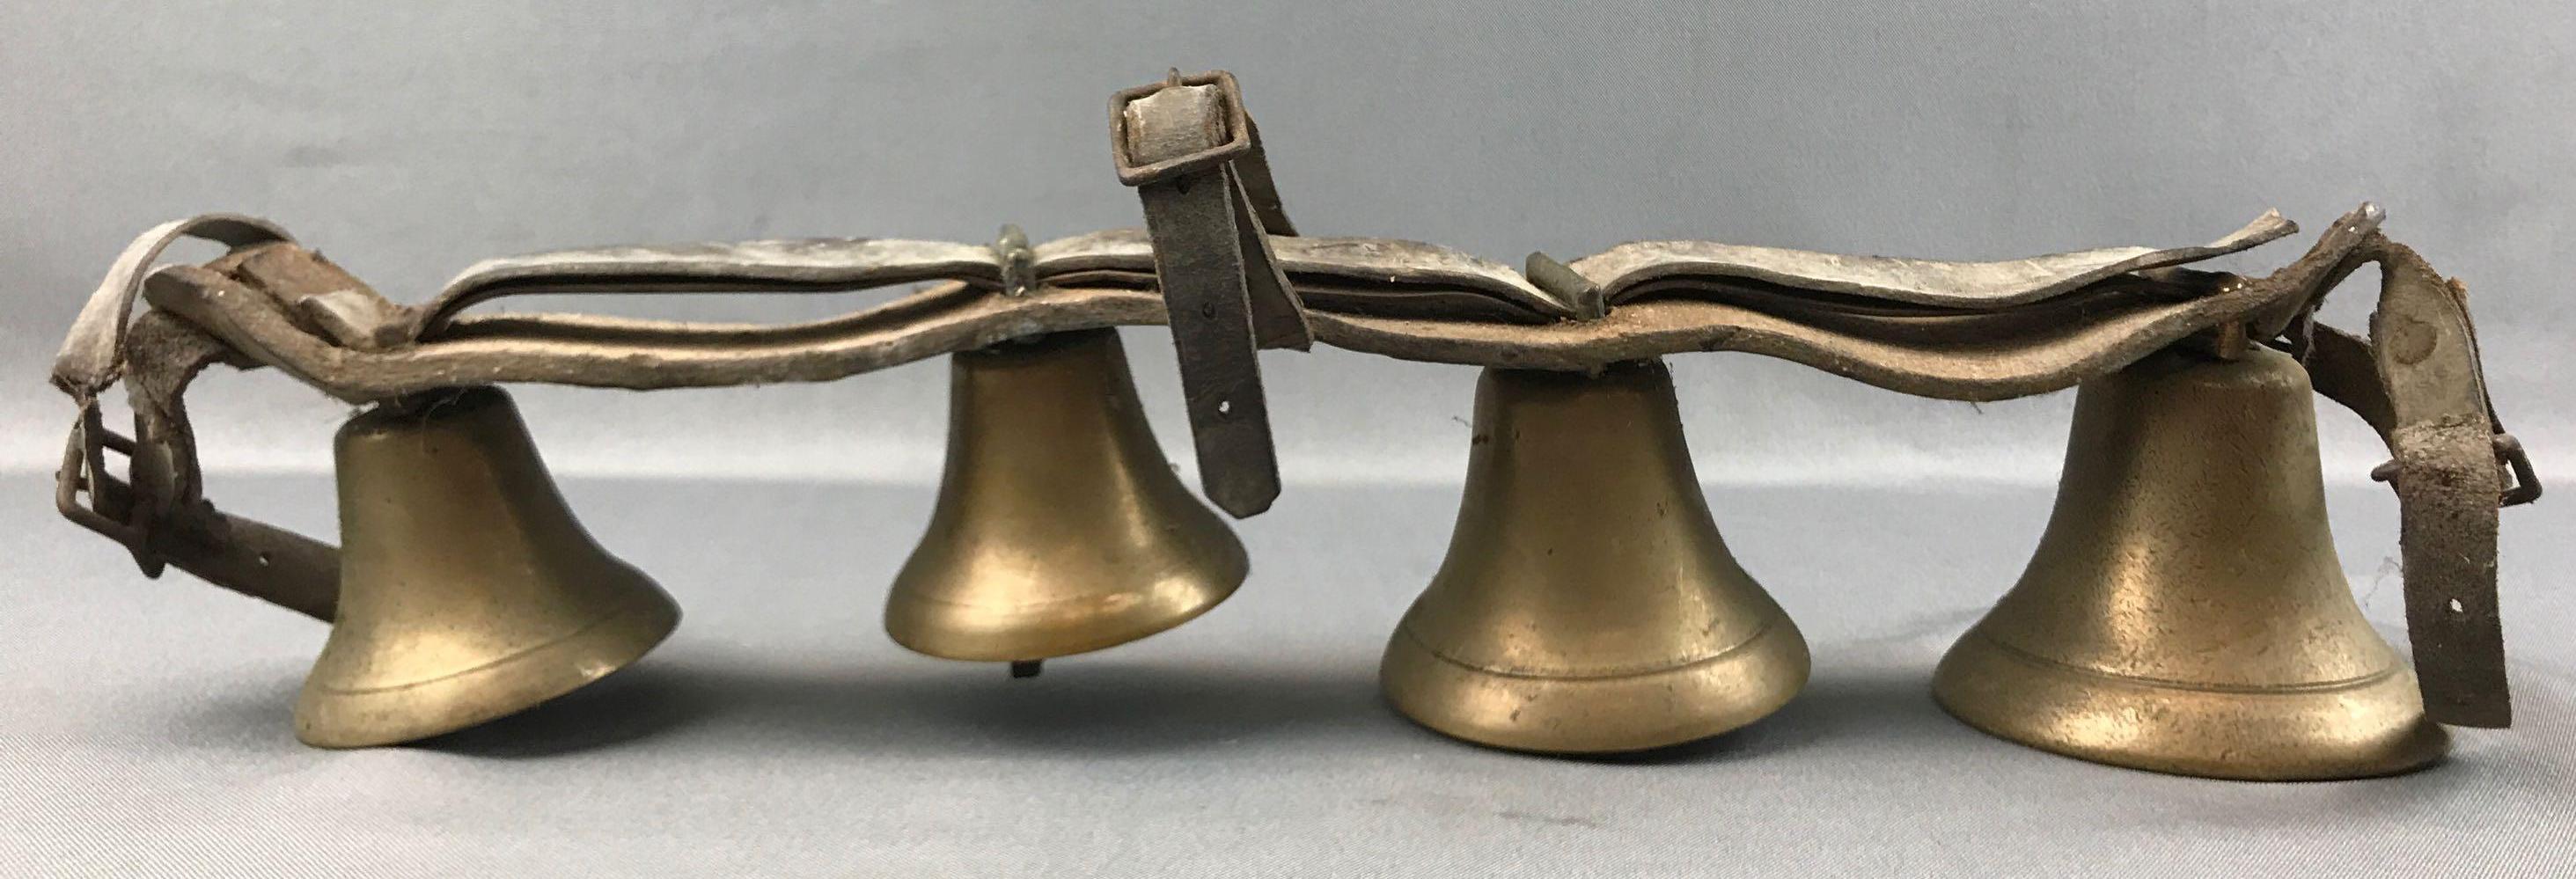 Antique brass handbell bell - Antique weapons, collectibles, silver, icons,  bronze, swords, daggers..